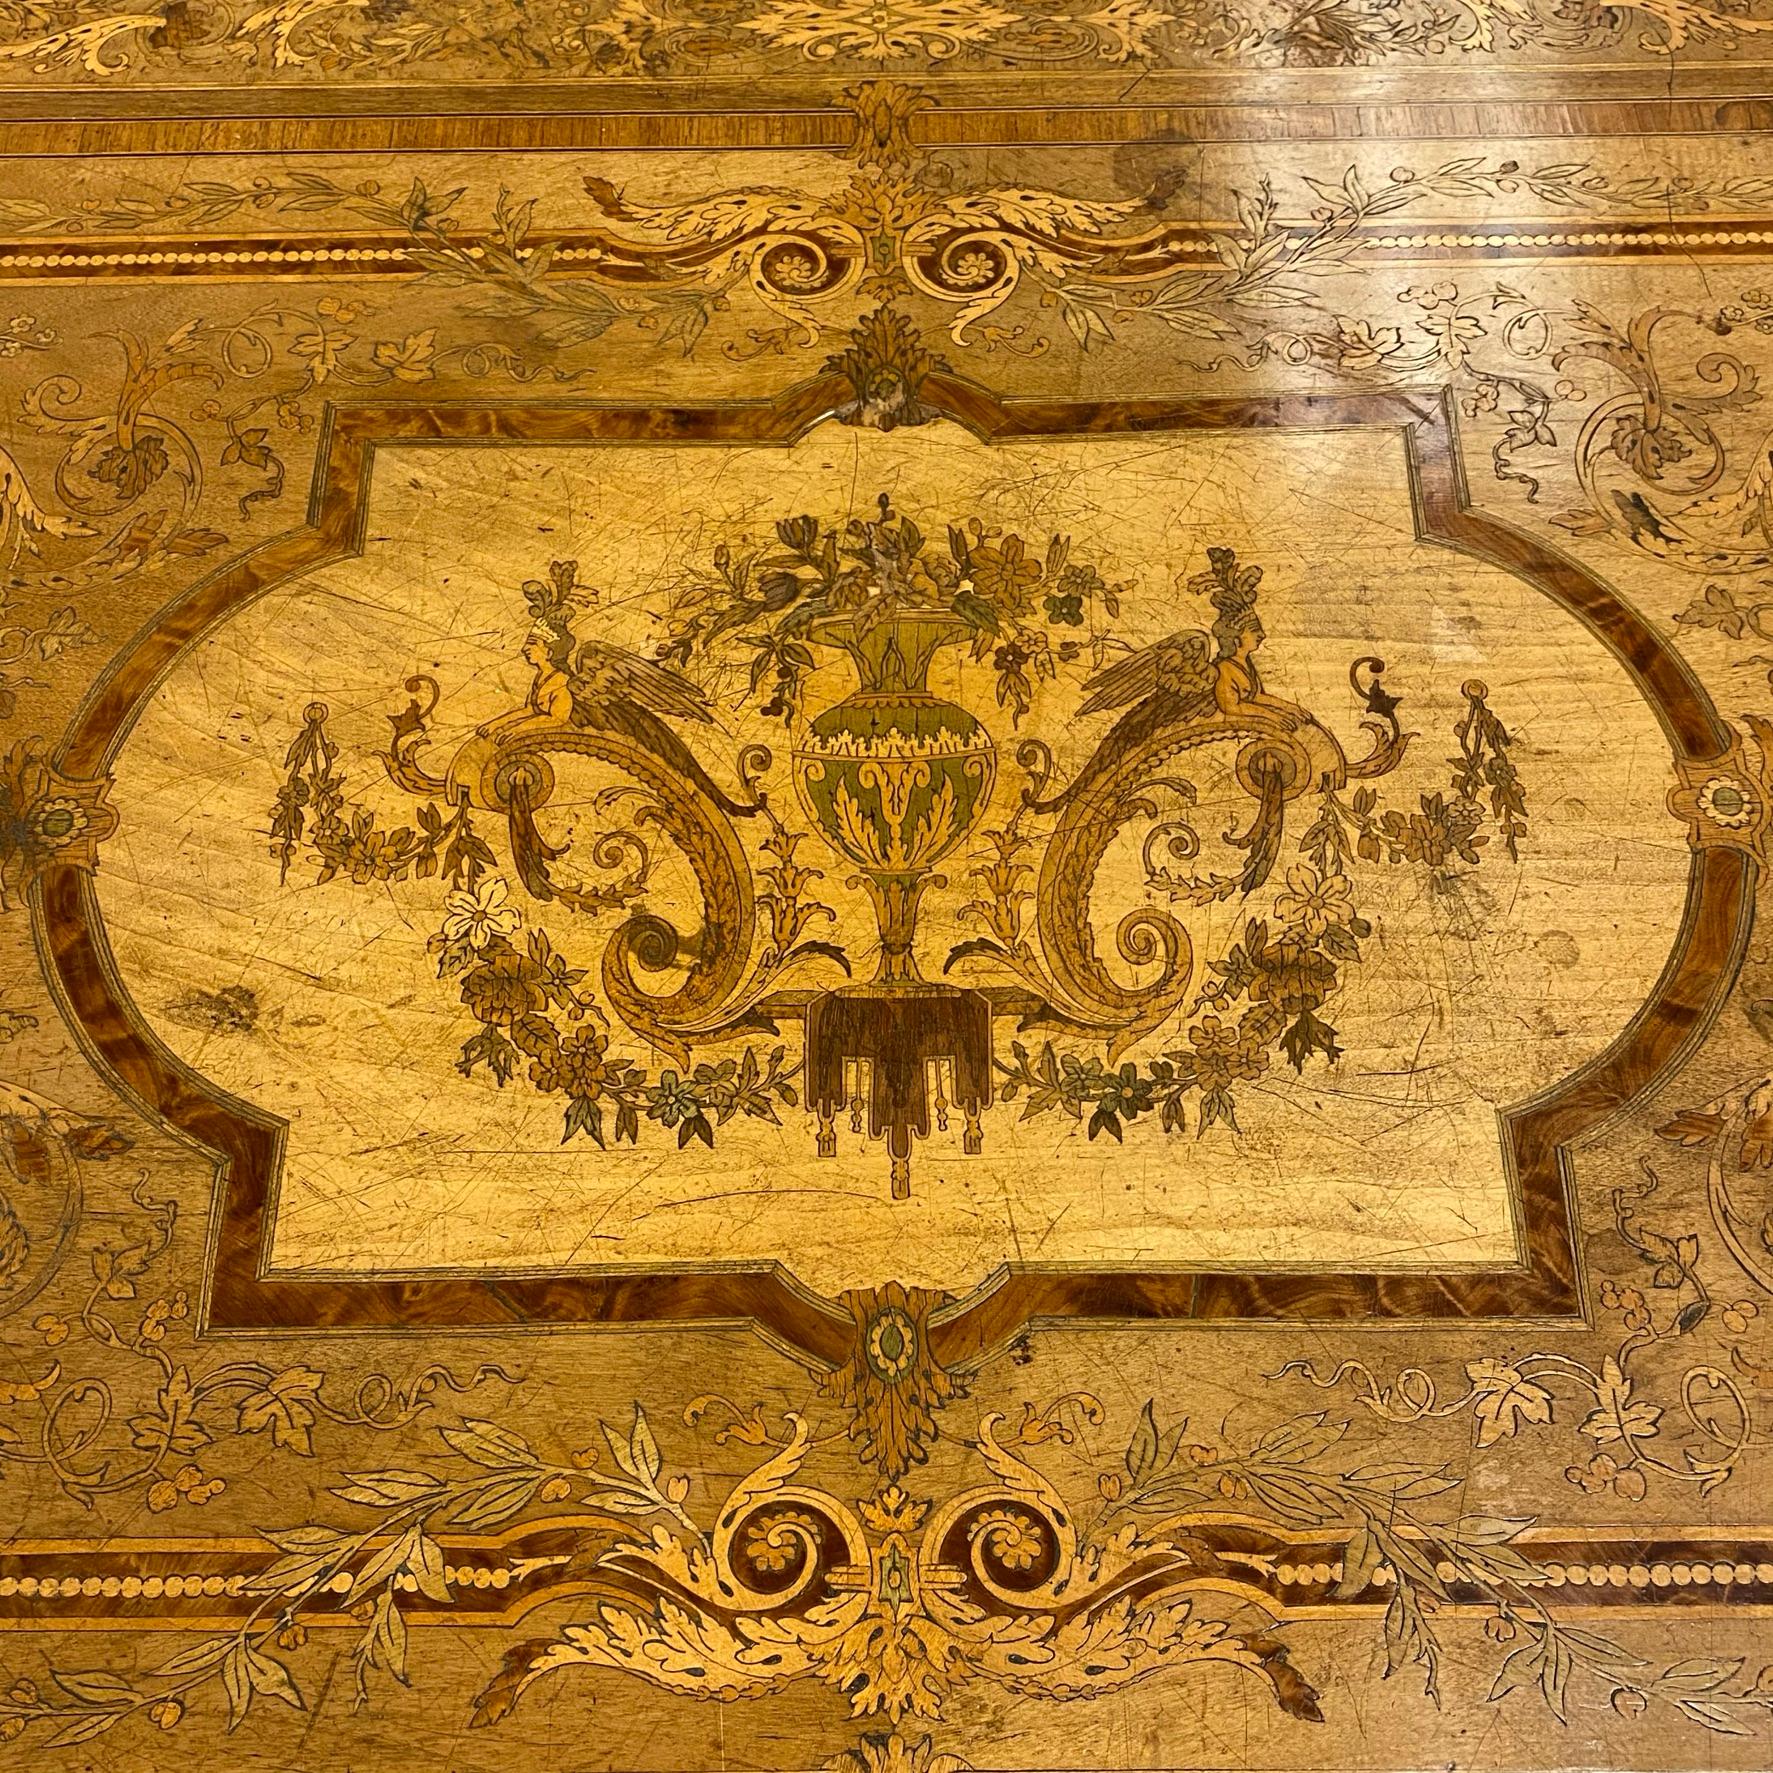 Very fine quality 19 century French Renaissance Revival gilt bronze mounted marquetry inlaid rectangular center table.